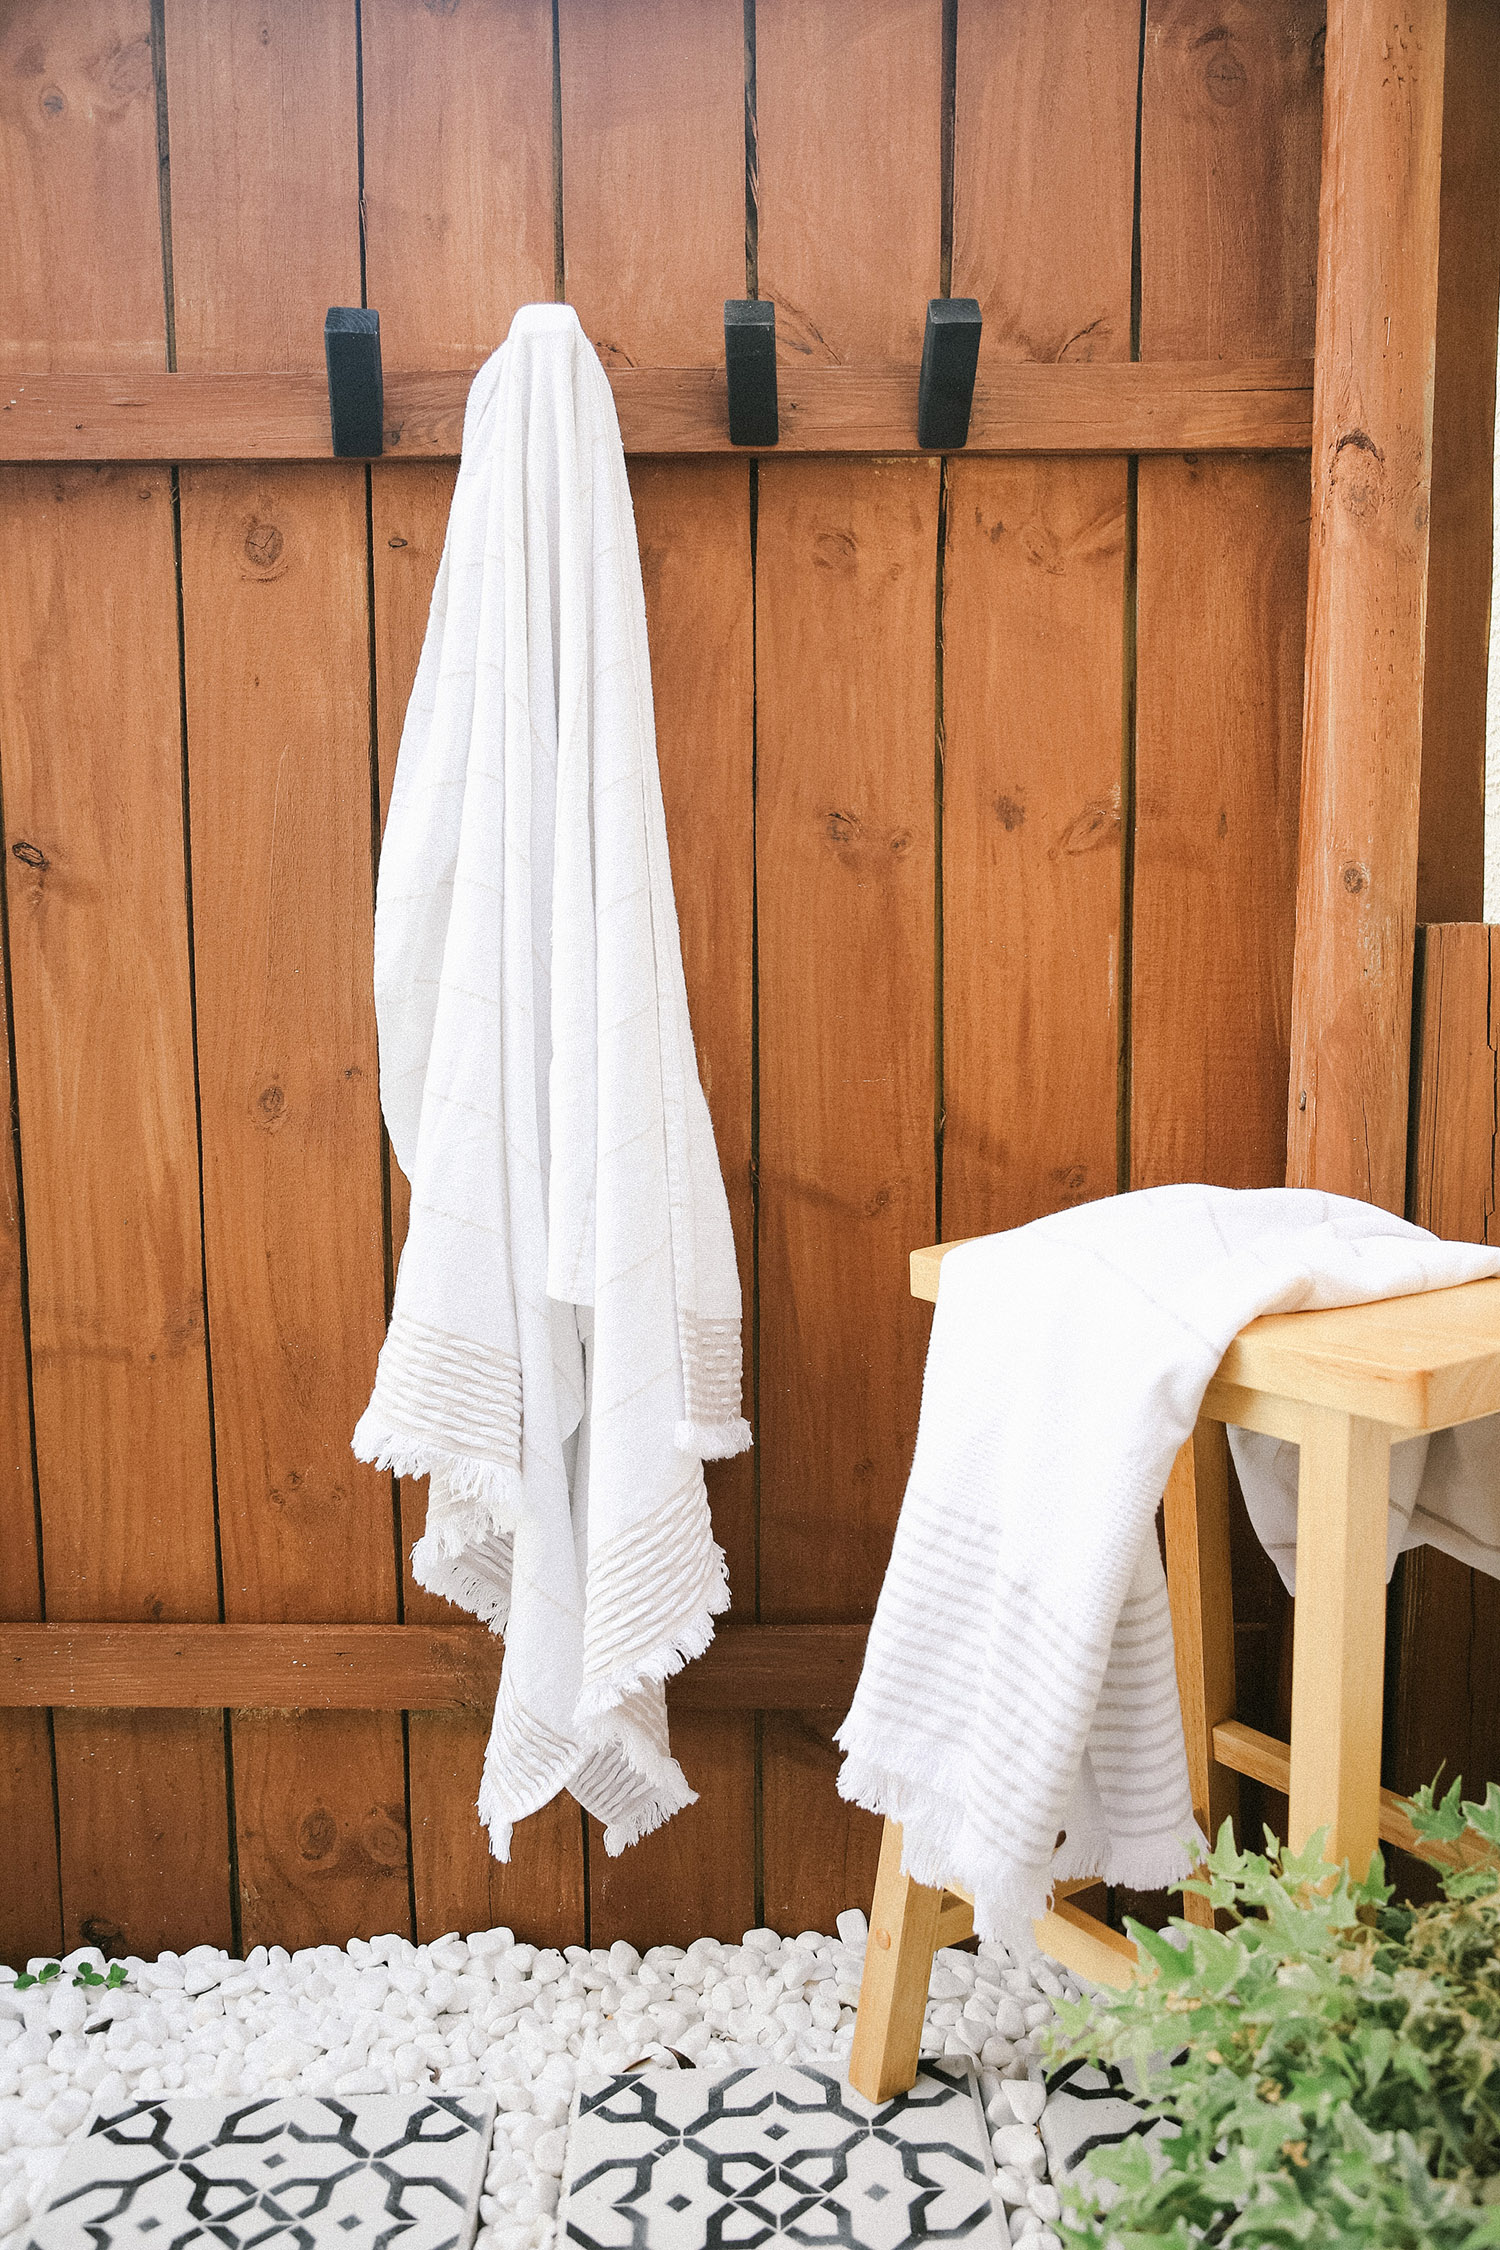 Top US lifestyle blogger Tabitha Blue shares How to Make Modern DIY Wooden Hooks for $1 Each! See the sleek wood hook design in her outdoor shower. | Wooden Hooks by popular Florida lifestyle blog, Fresh Mommy Blog: image of a white towel hanging on a wood hook that's mounted in a outdoor shower. 